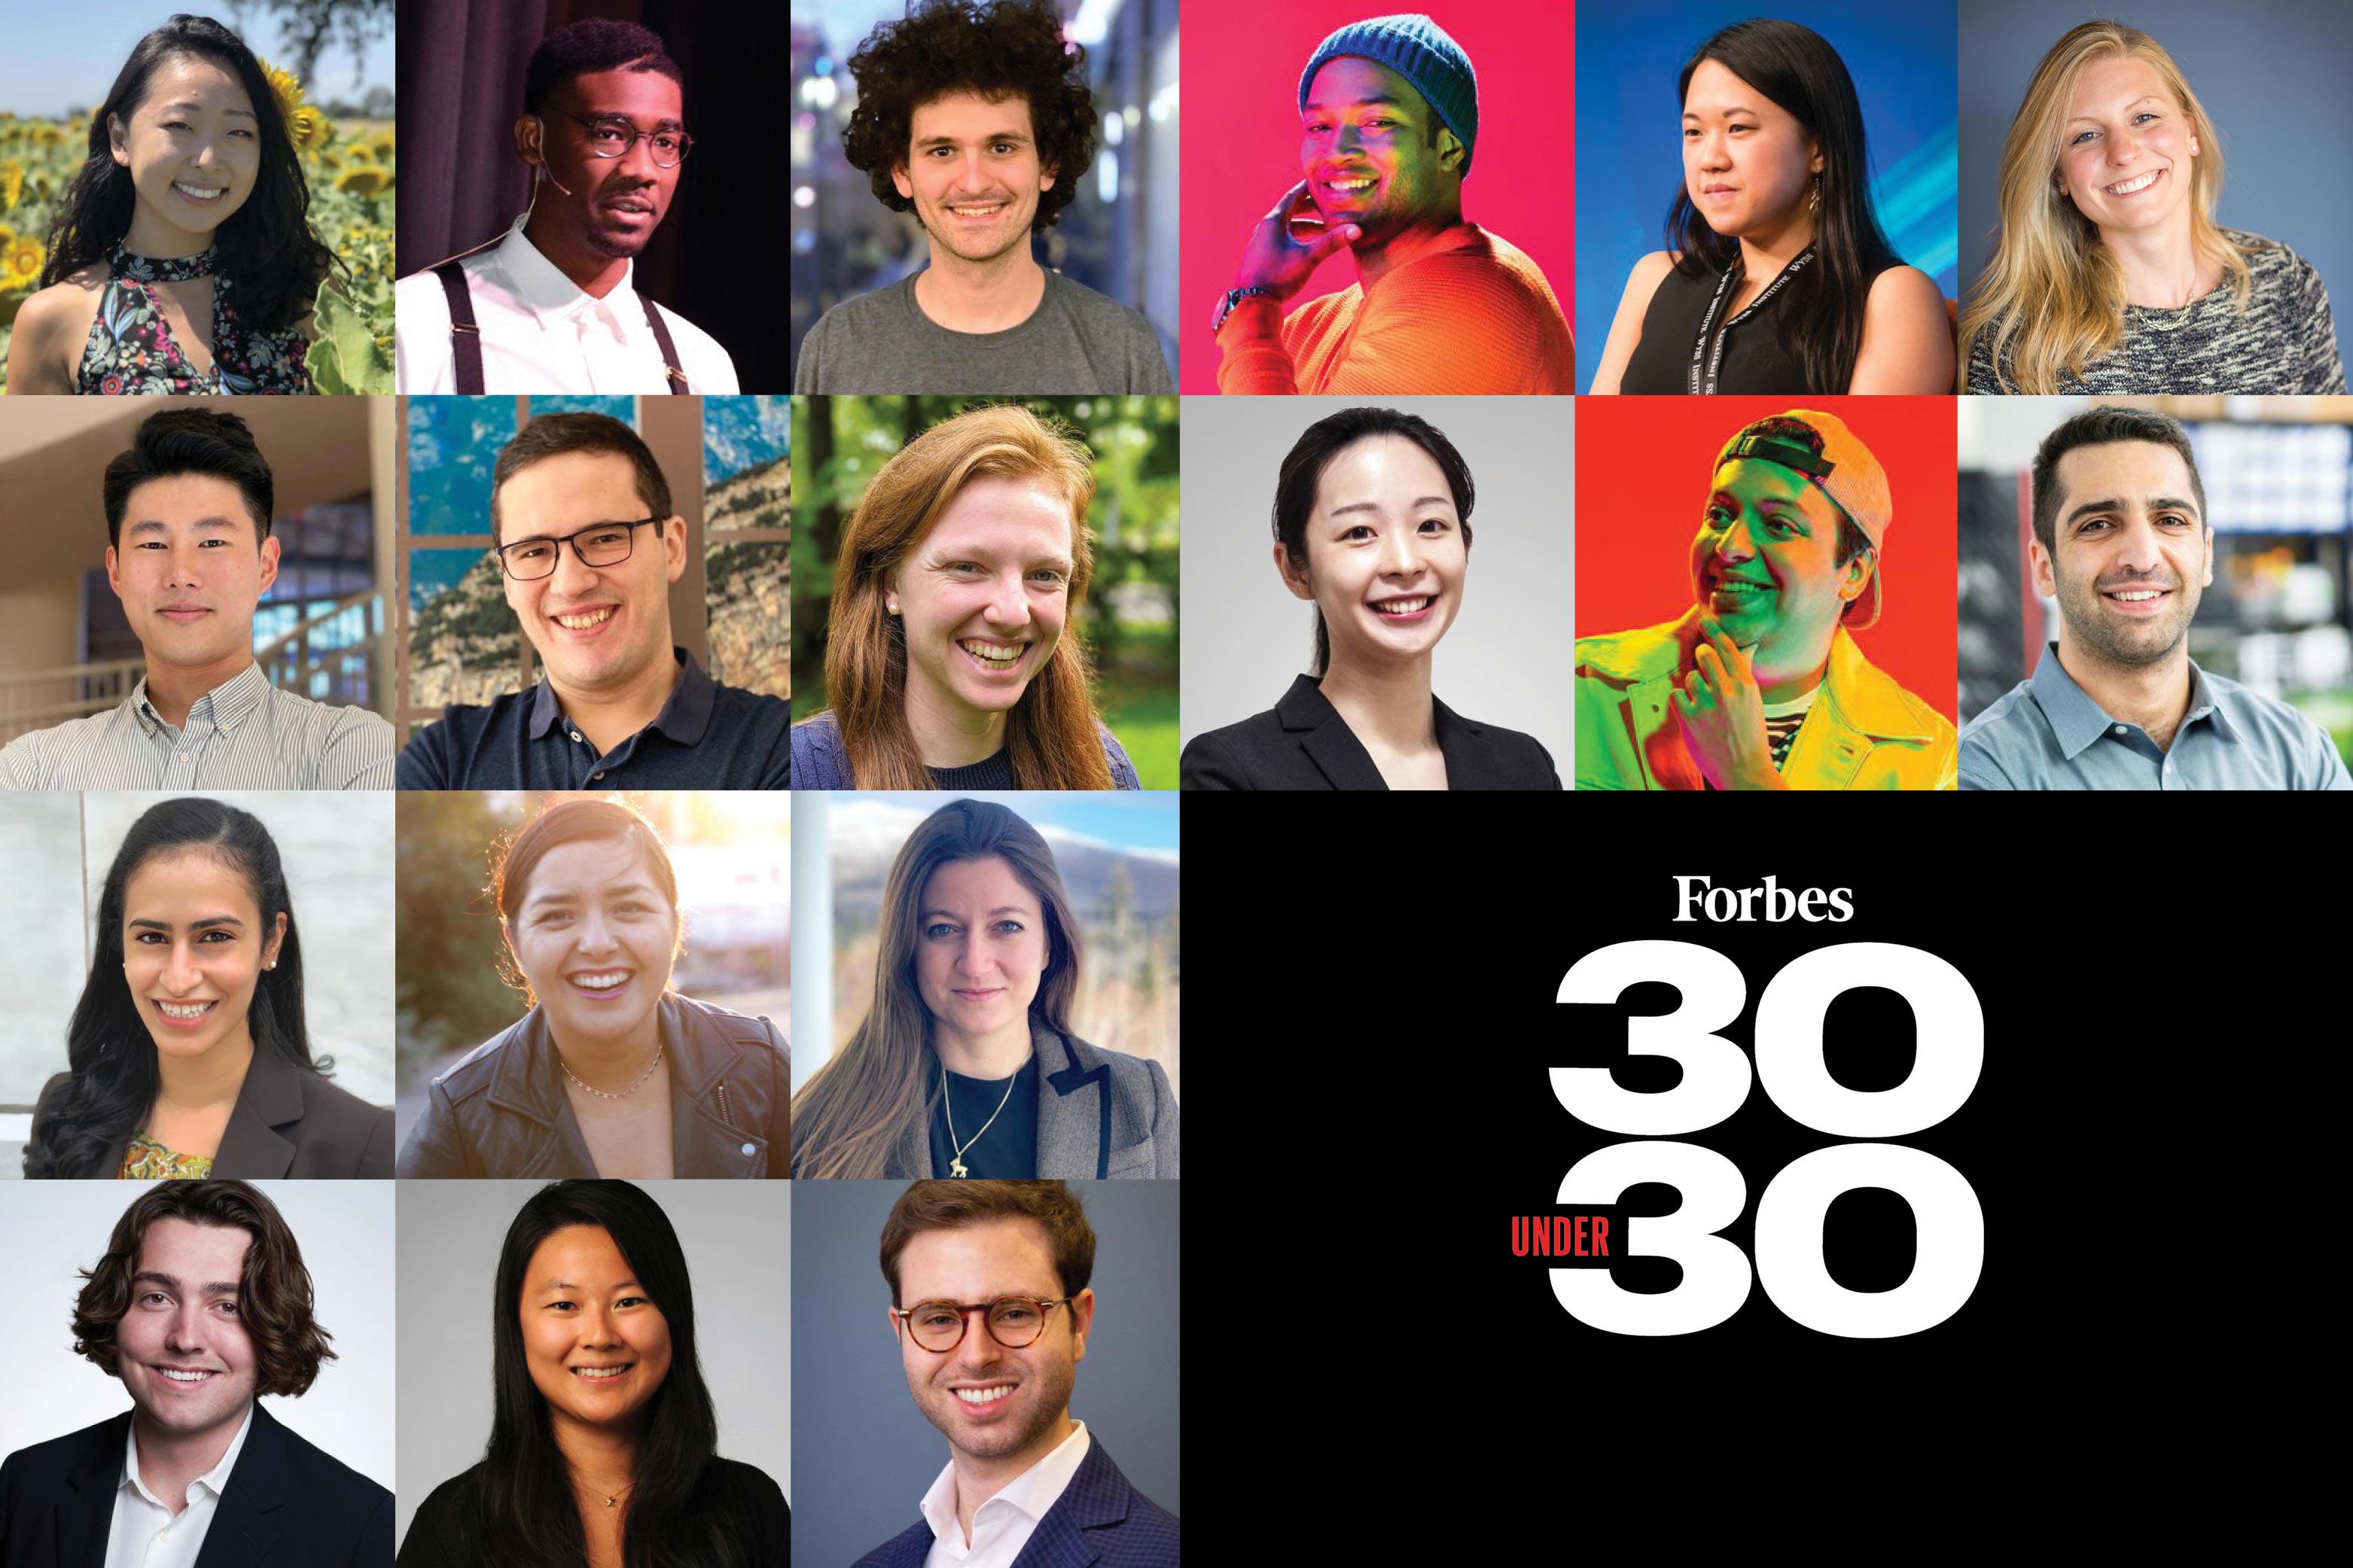 MIT community members faces named to Forbes 30 Under 30 list for 2021